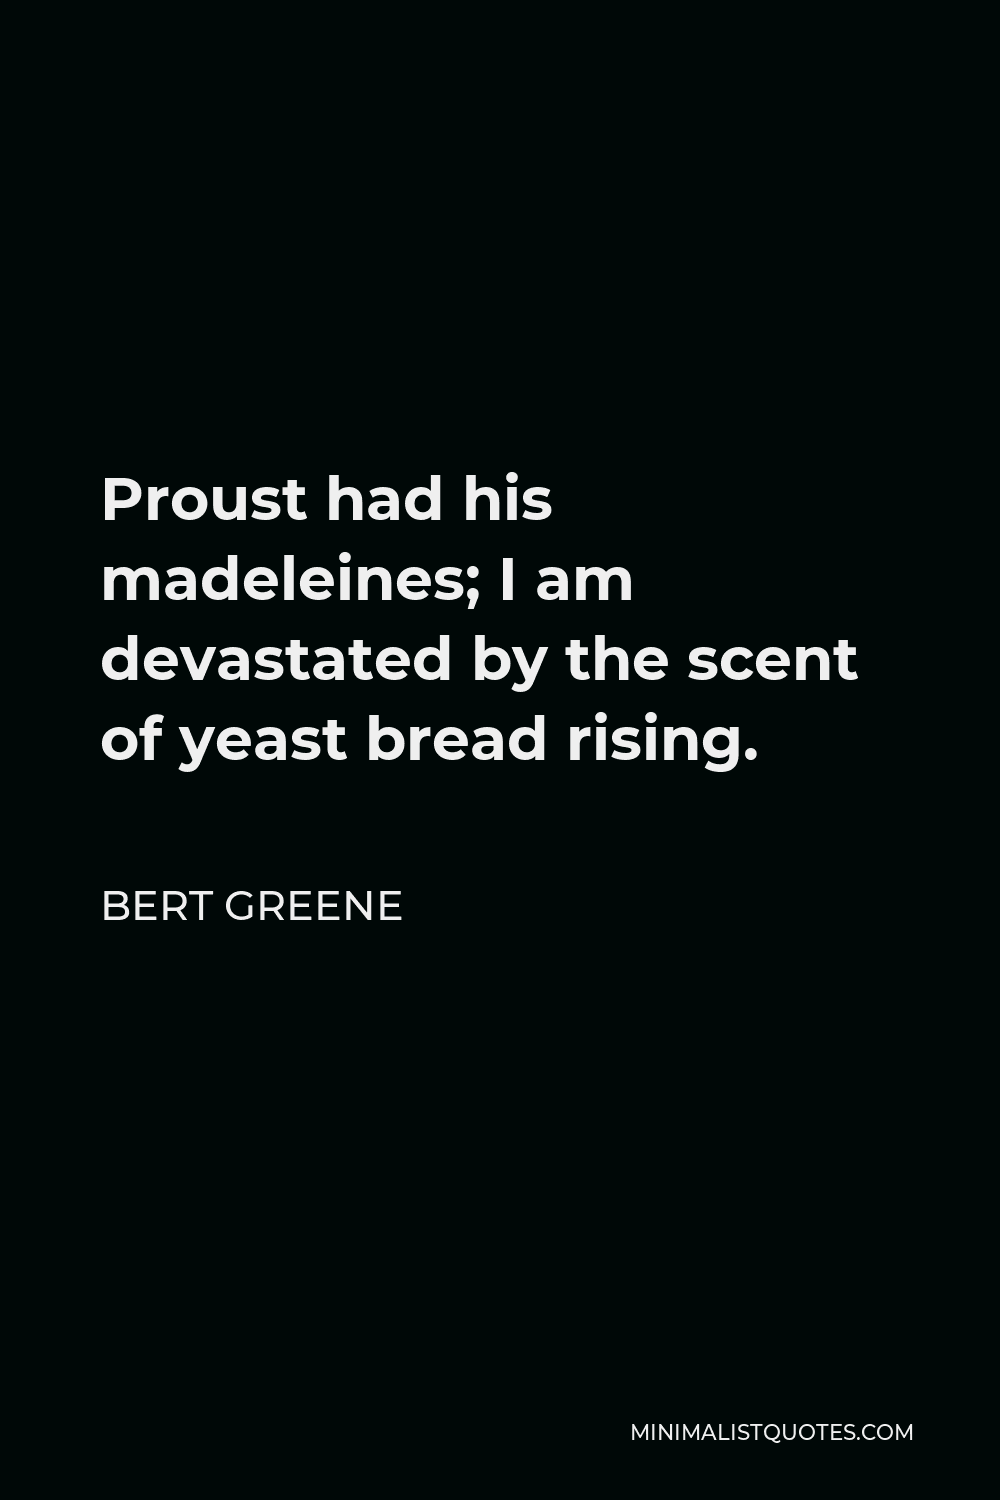 Bert Greene Quote - Proust had his madeleines; I am devastated by the scent of yeast bread rising.